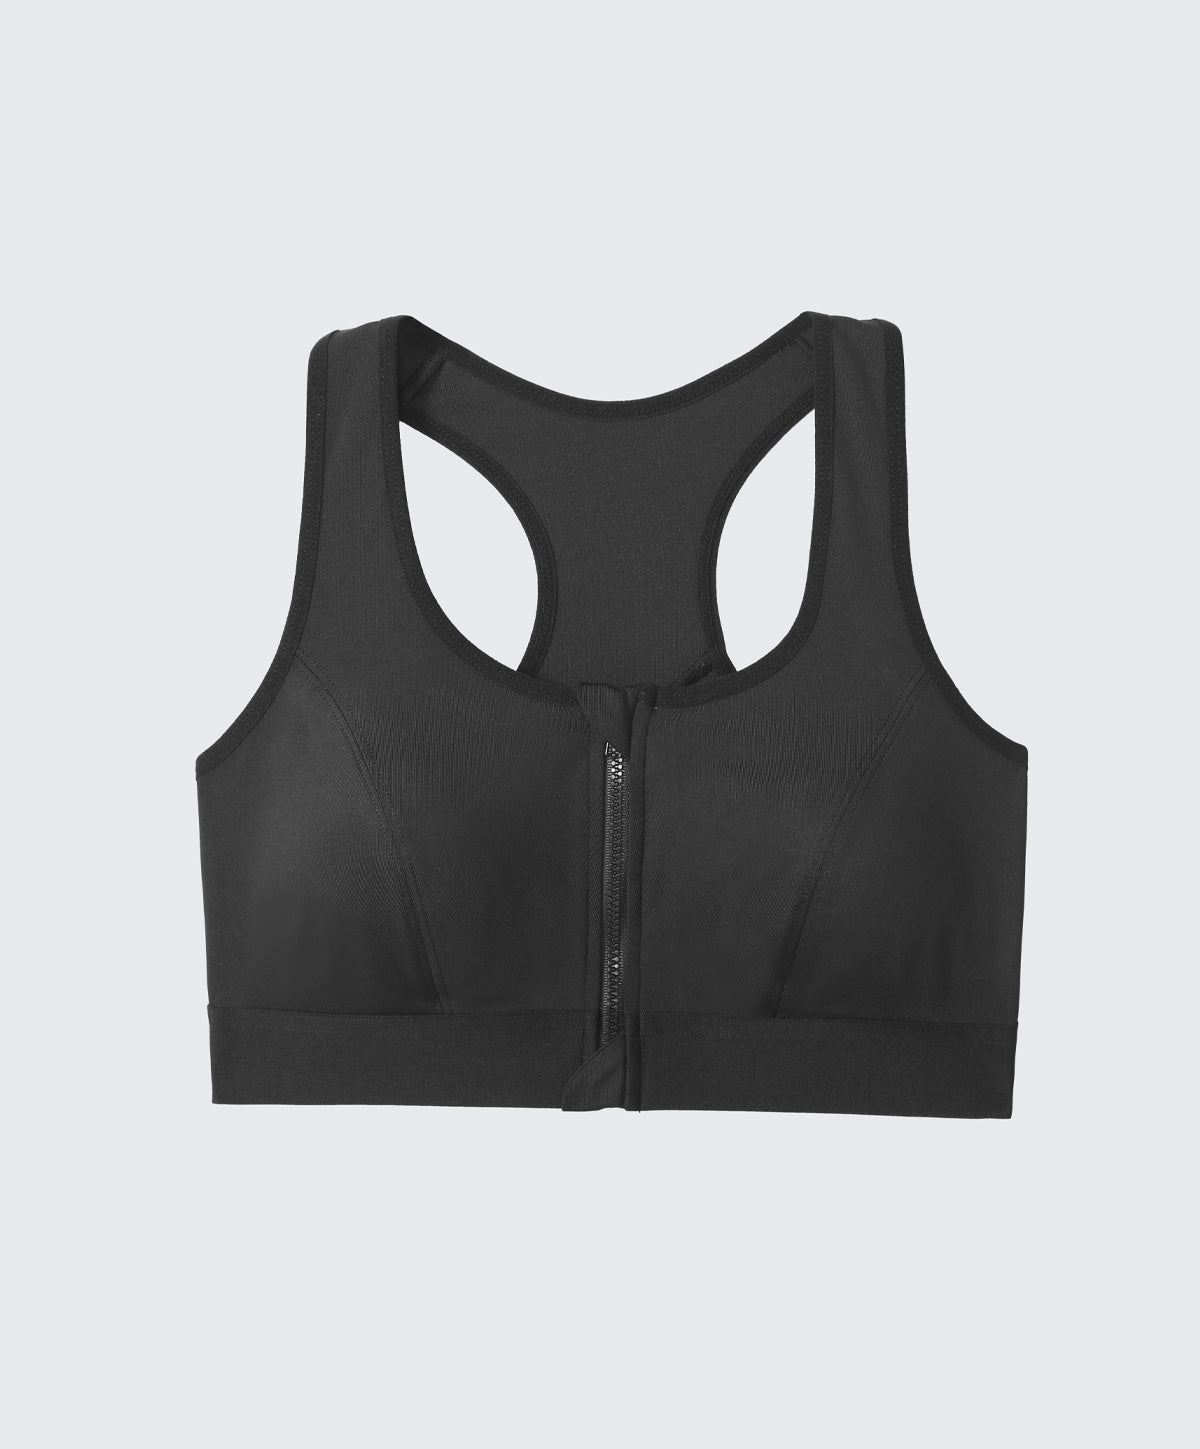 Pierre Cardin Lingerie Indonesia - Our Moisture Wick series has a wide  variety of staple pieces for your active wardrobe ✓ #sportbra  #pierrecardinlingerie #confidentissexy